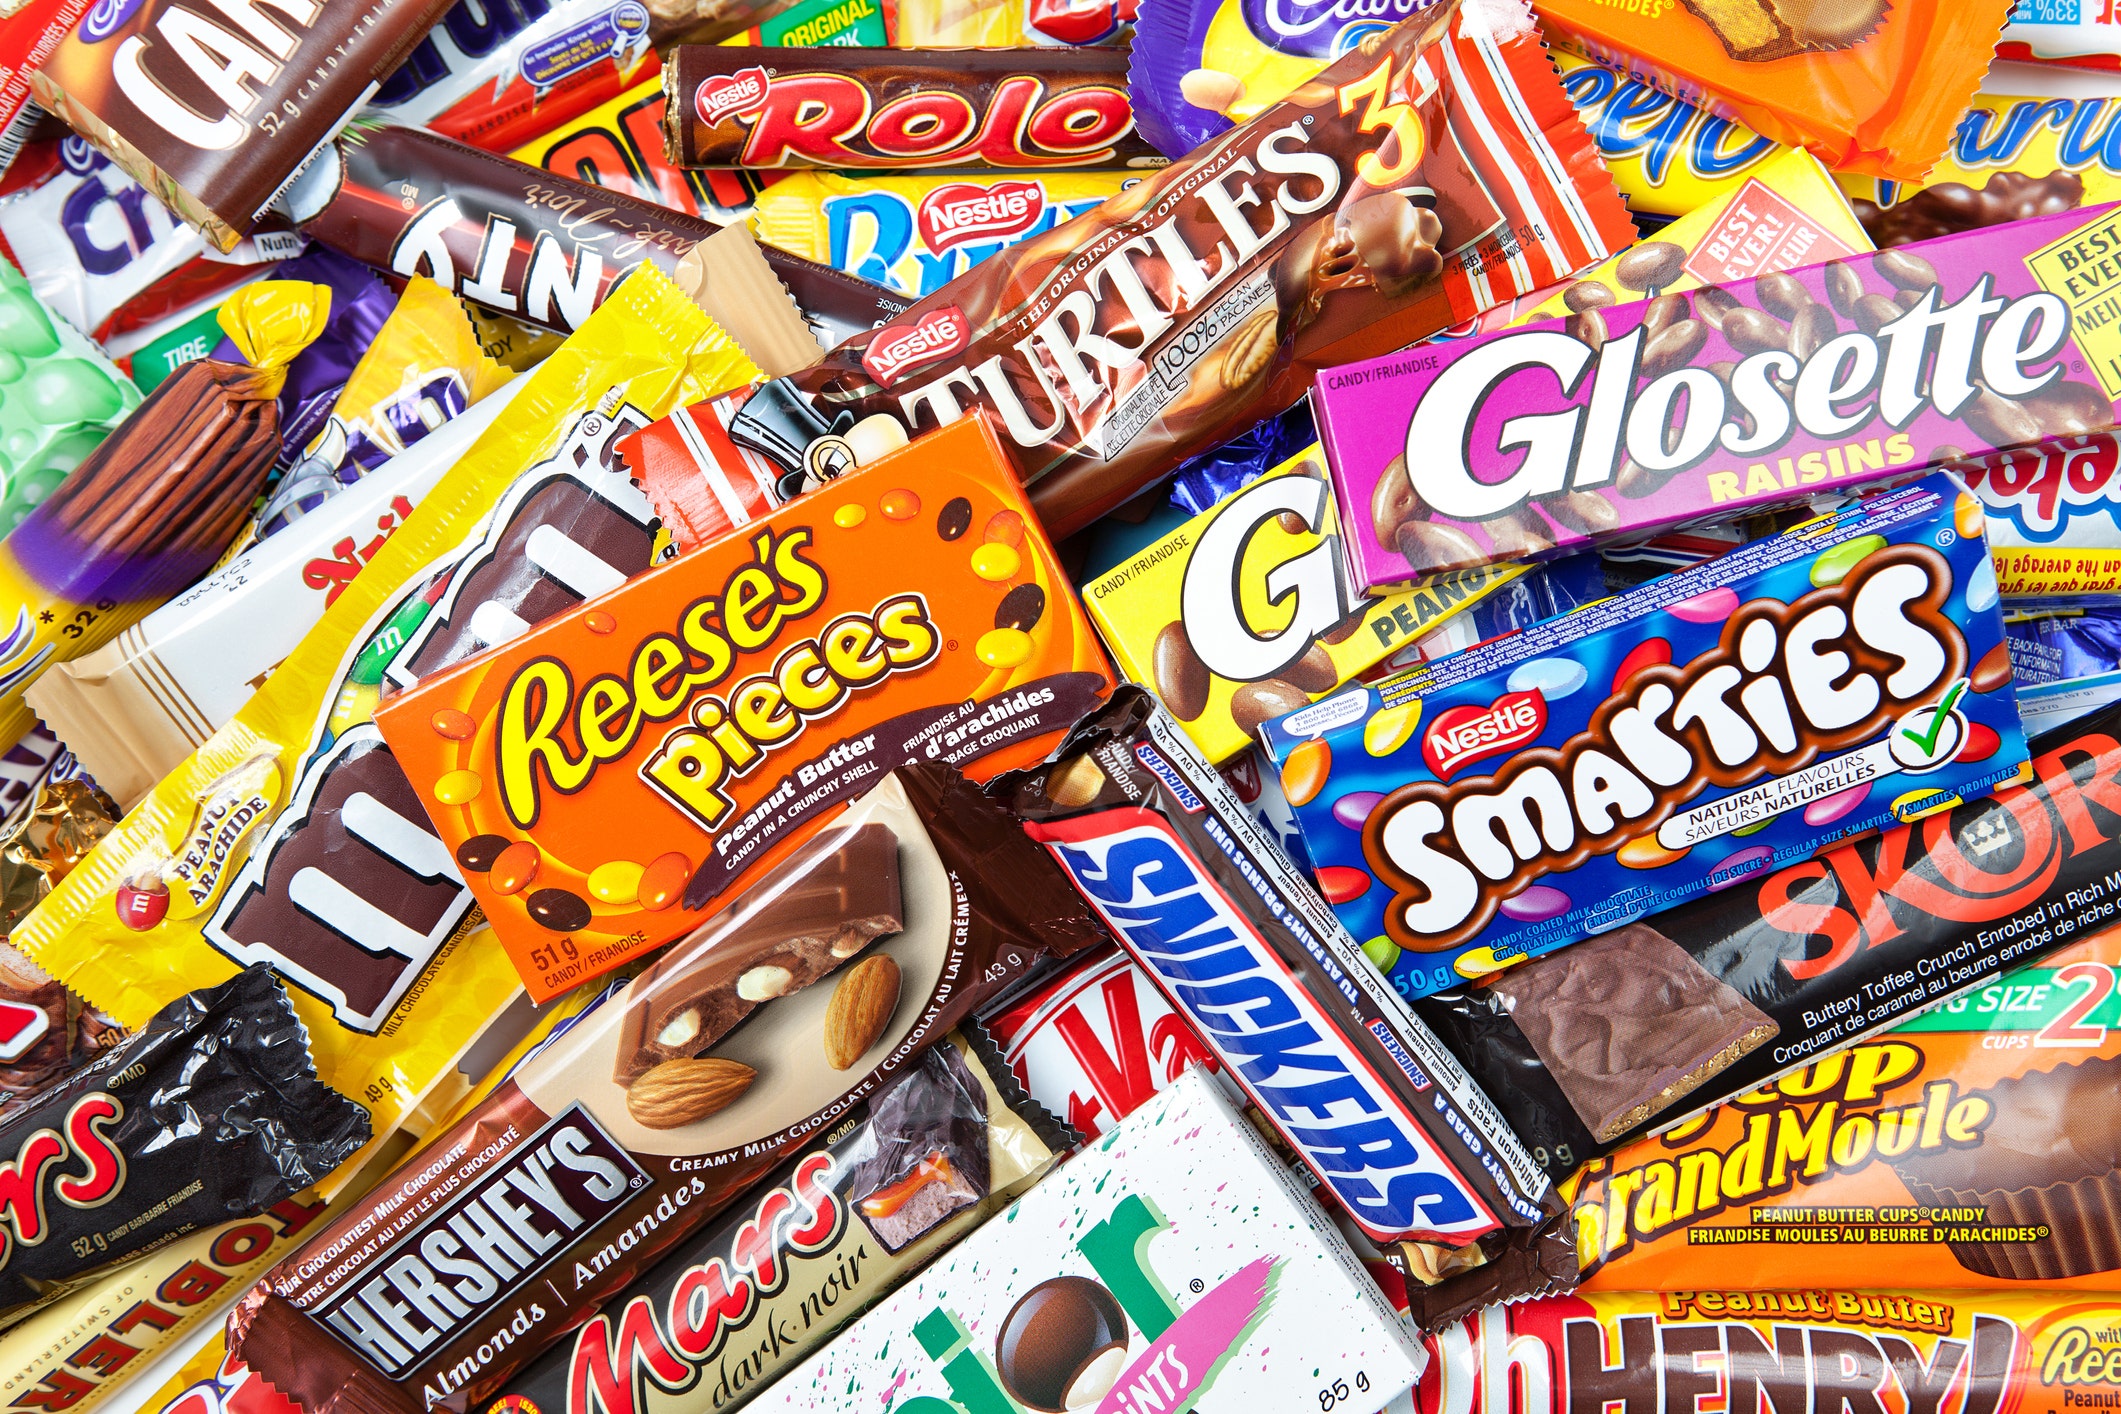 Candy company that pays $ 30 an hour to eat, analyzes sweets